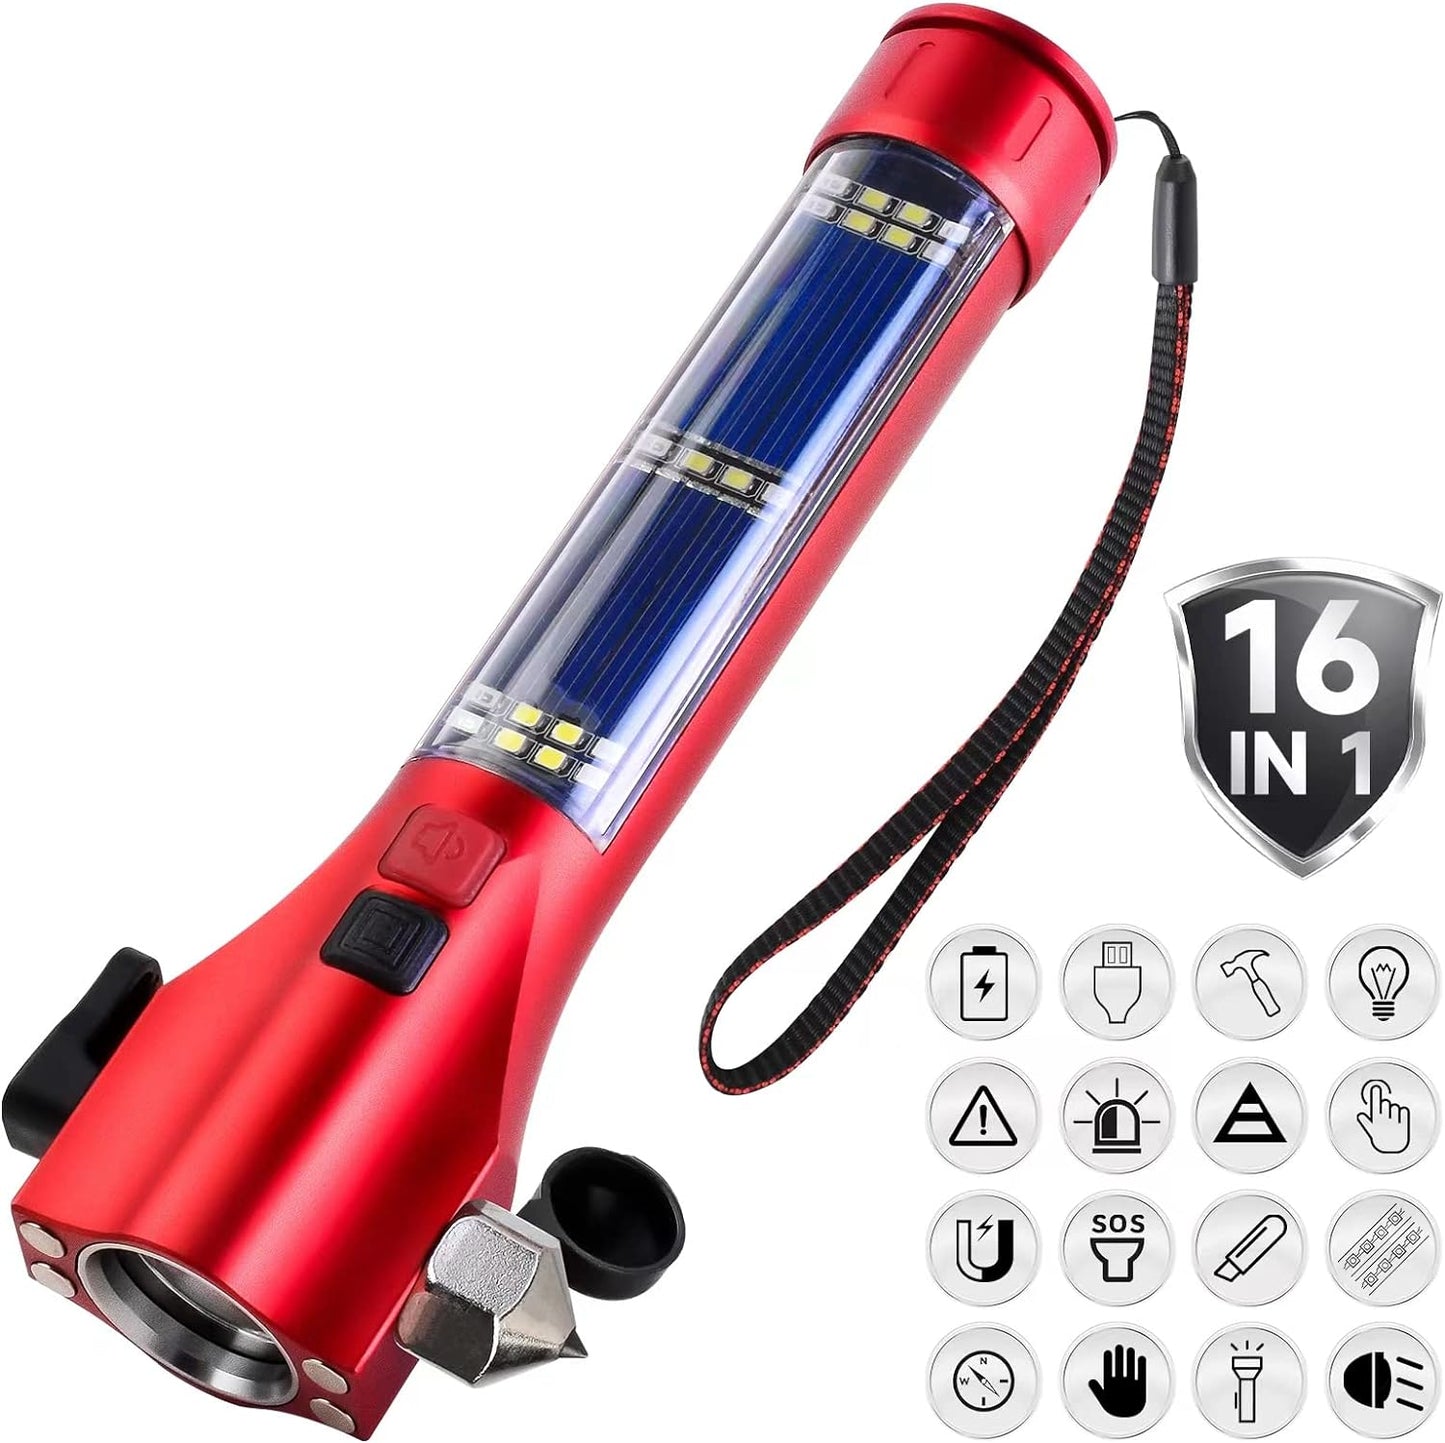 Unicumoo Solar Powered Car Safety Hammer Flashlight with Seatbelt Cutter, LED High Lumens, Red and Blue SOS Flashing, USB Charging, Magnetic Attraction, Portable Design